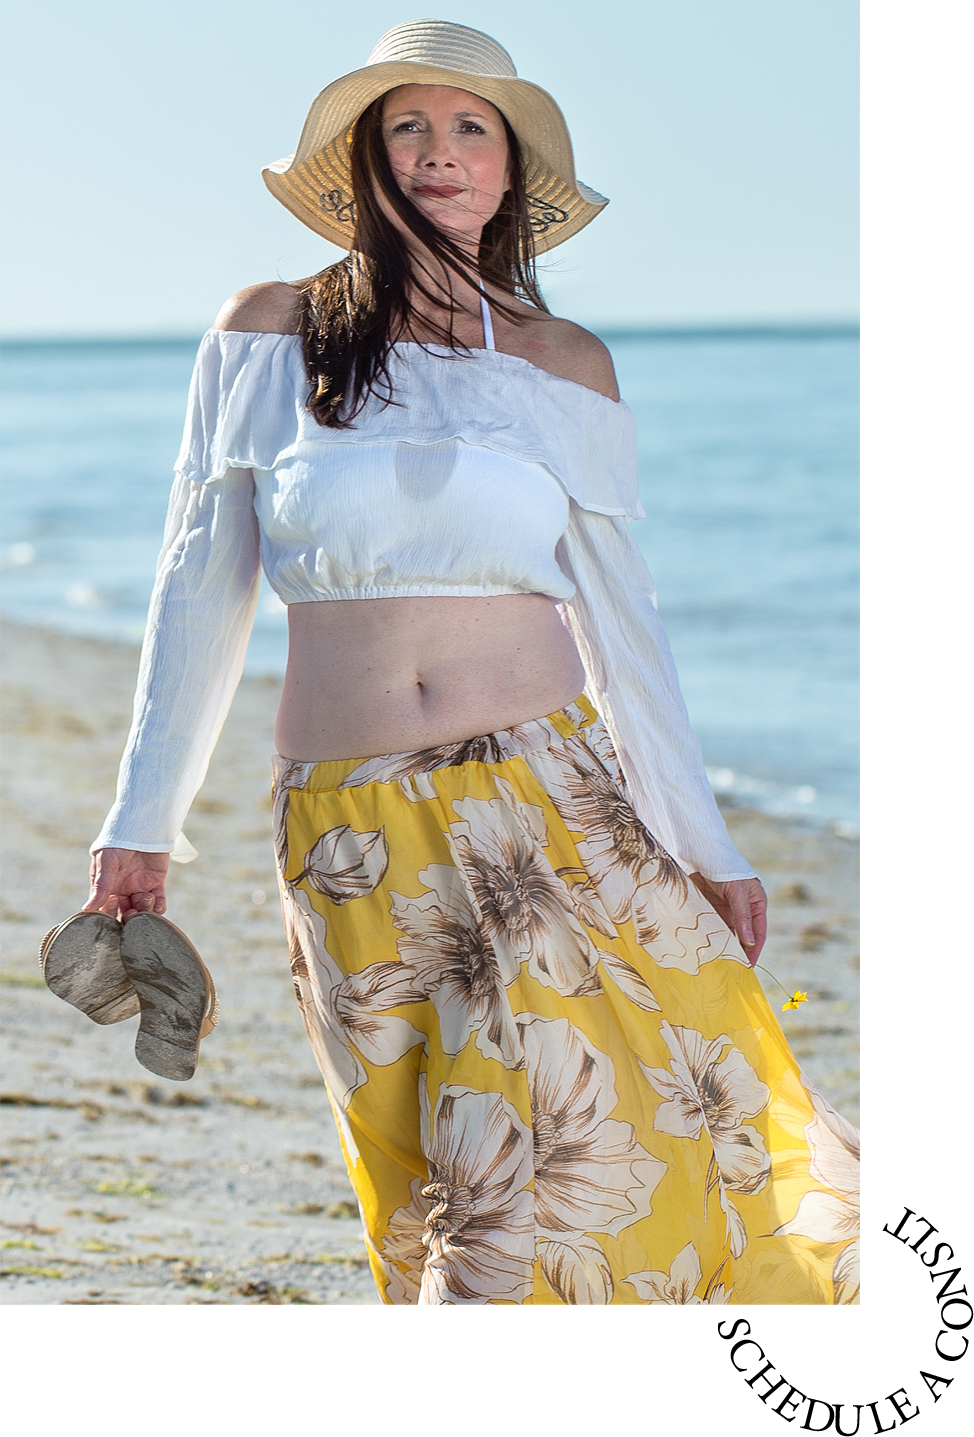 Middle age woman over 50 in yellow skirt with long hair walking alone on a Florida beach